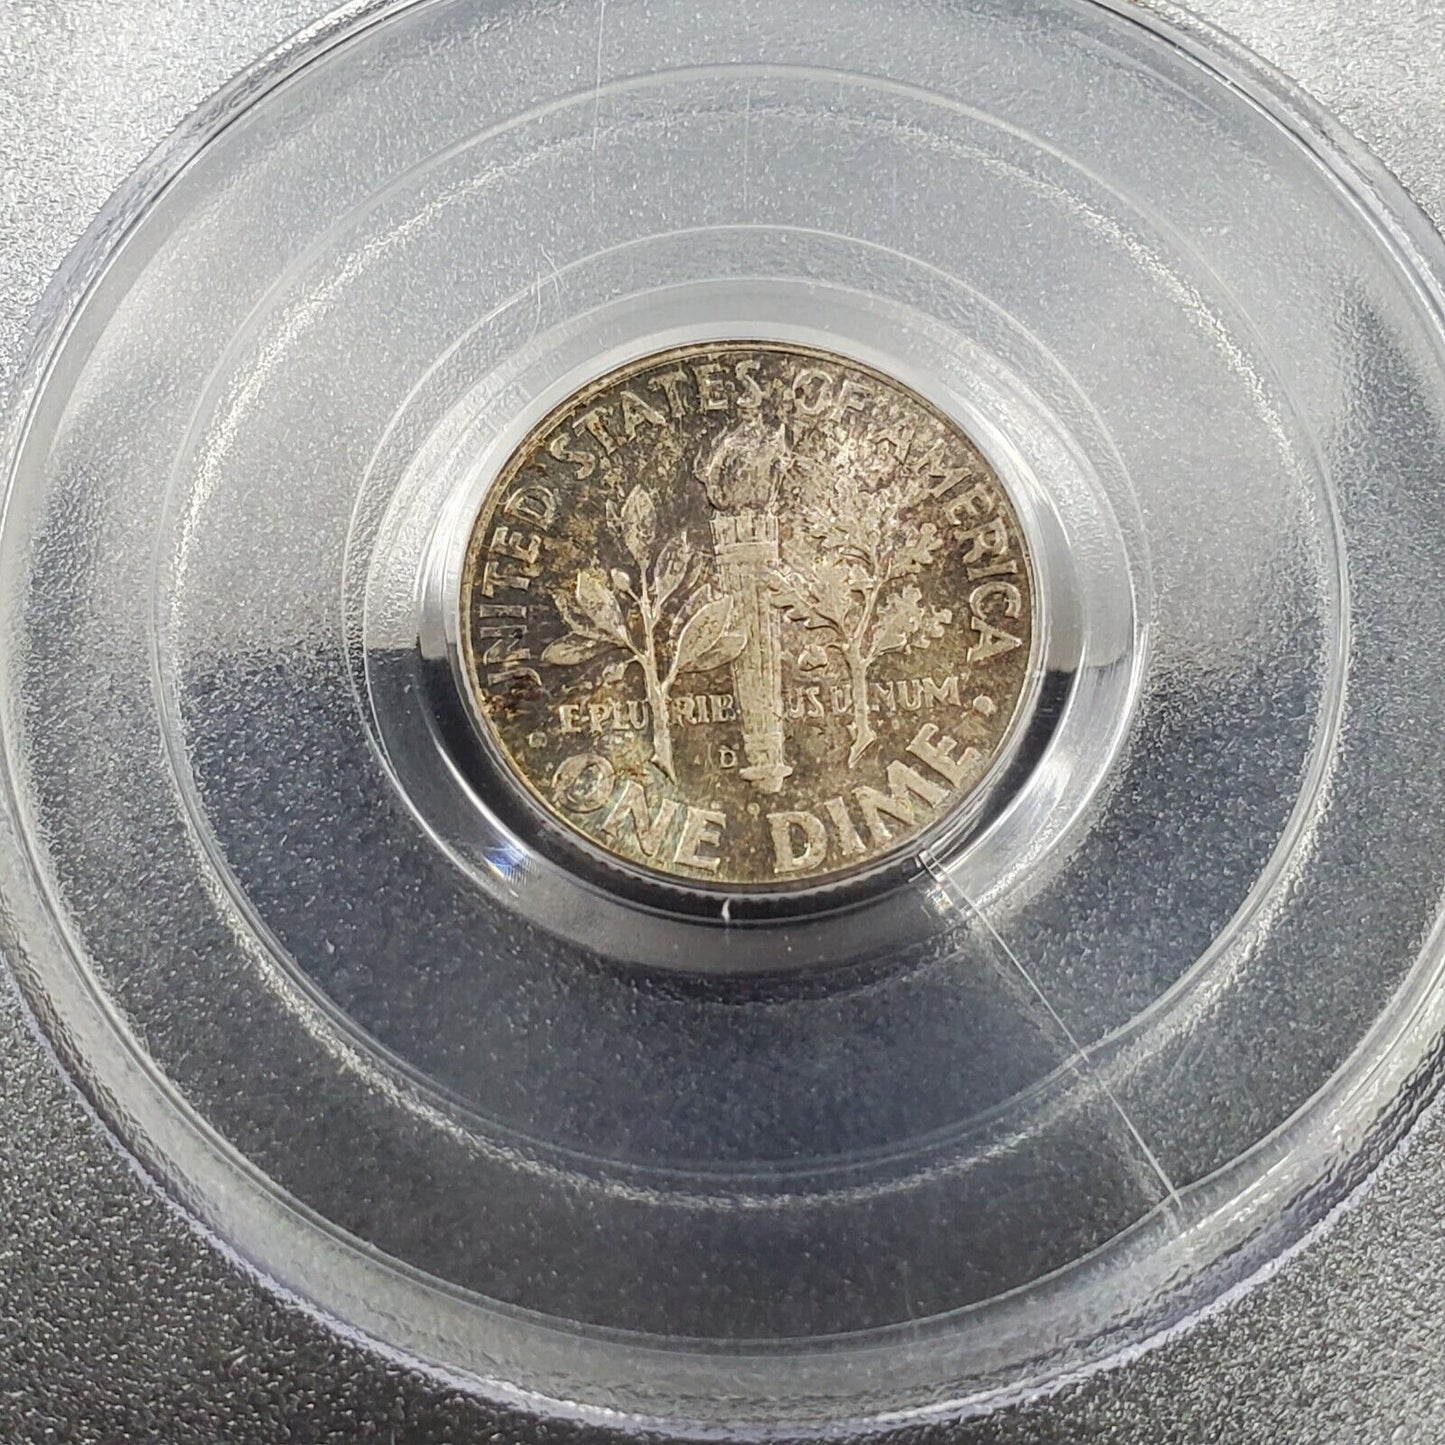 1946 P Roosevelt 10c Silver Dime Coin PCGS MS66 Neat Toning Toner